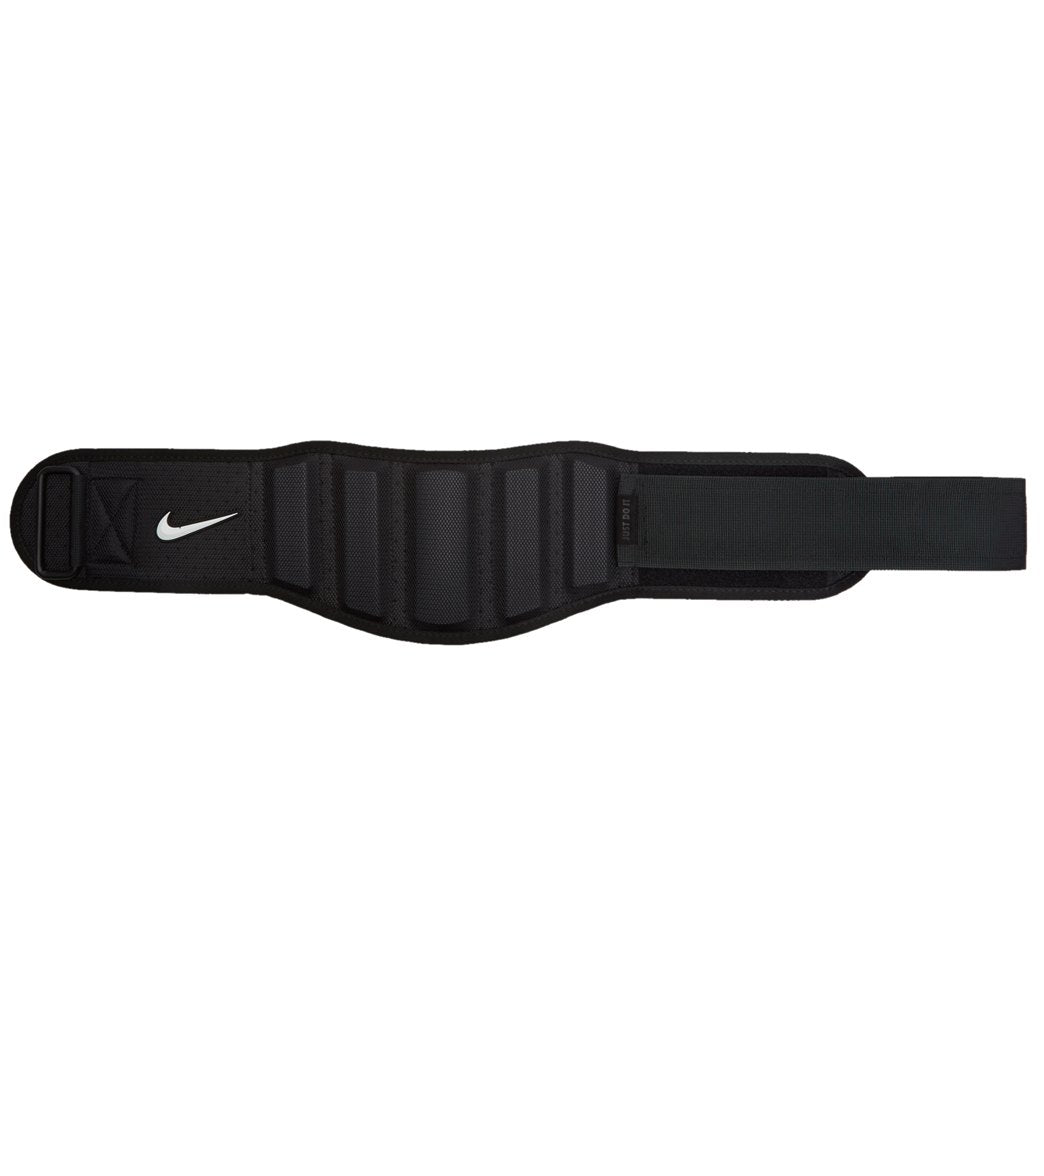 Nike Structured Training Belt 3.0 at SwimOutlet.com